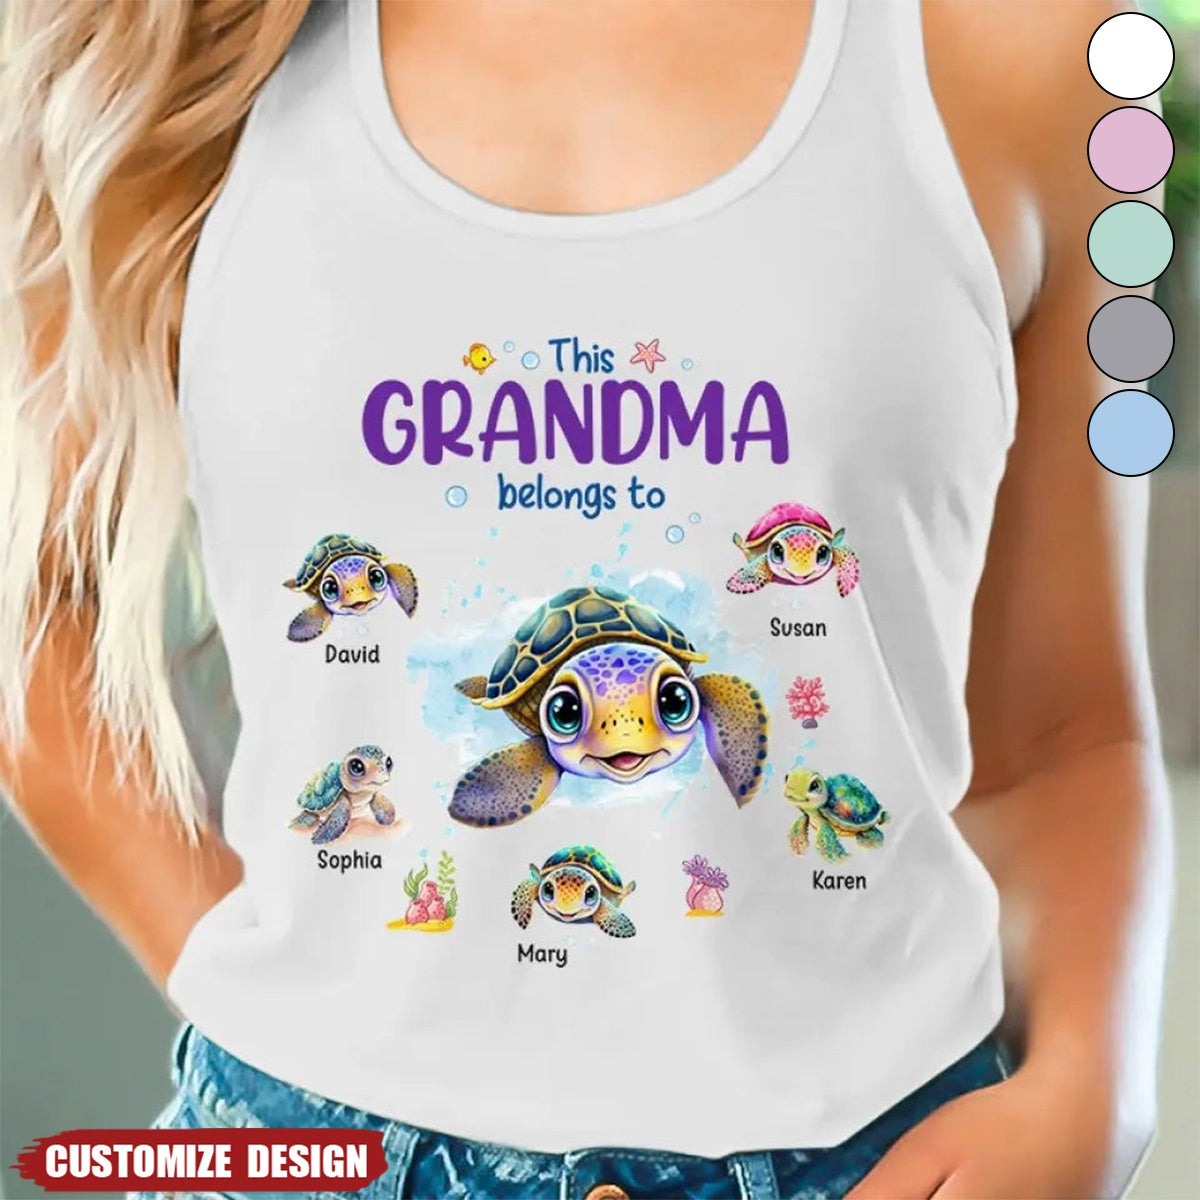 This Grandma Belongs To - Family Personalized Racer Back Tank Top - Gift For Mom, Grandma